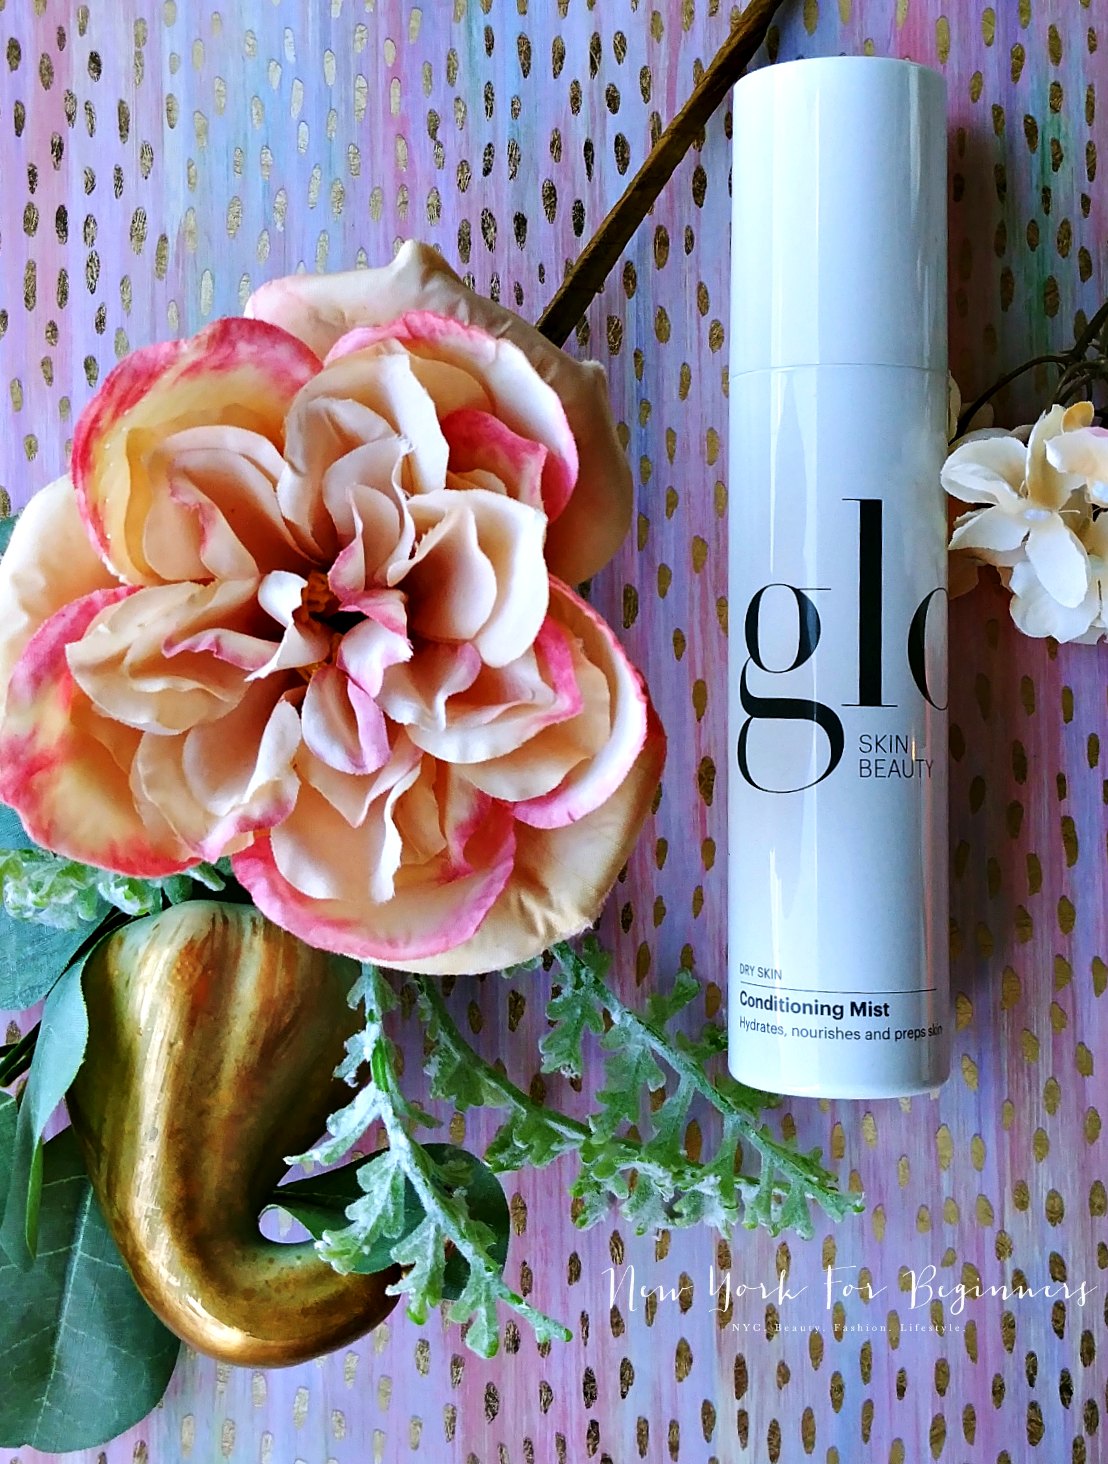 Glo Skin Beauty Conditioning Mist review at New York For Beginners